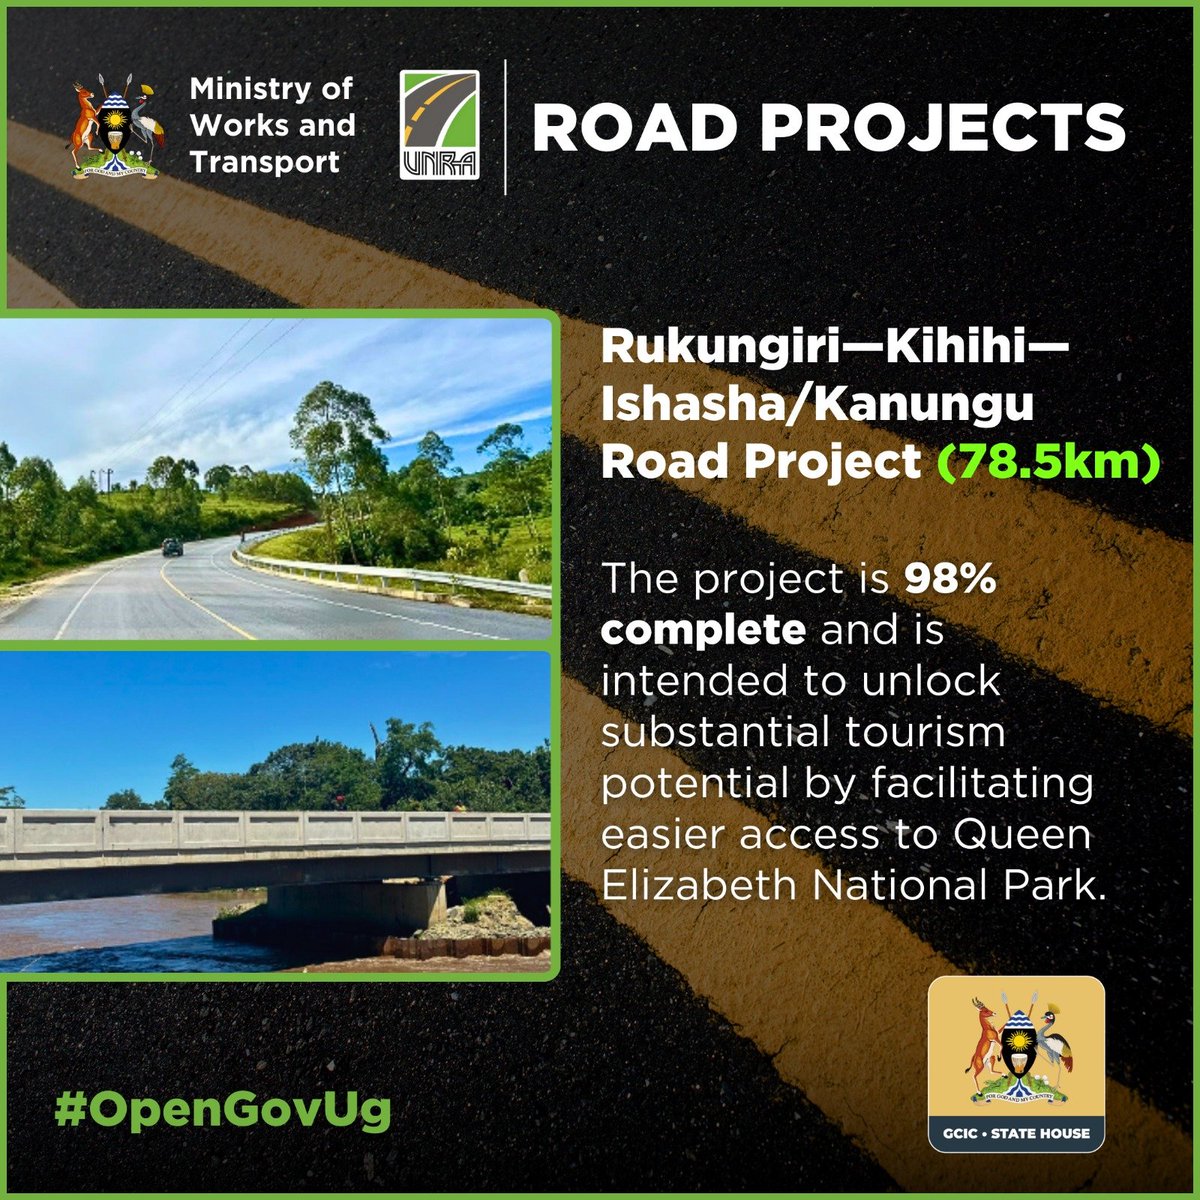 One of the Tourism Roads is now at 98% completion, soon you will be able to drive seamlessly from Kampala to Bwindi Impenetrable Forest that has one of the richest faunal communities in East Africa. But the most famous residents are the mountain gorillas @ugwildlife @UNRA_UG